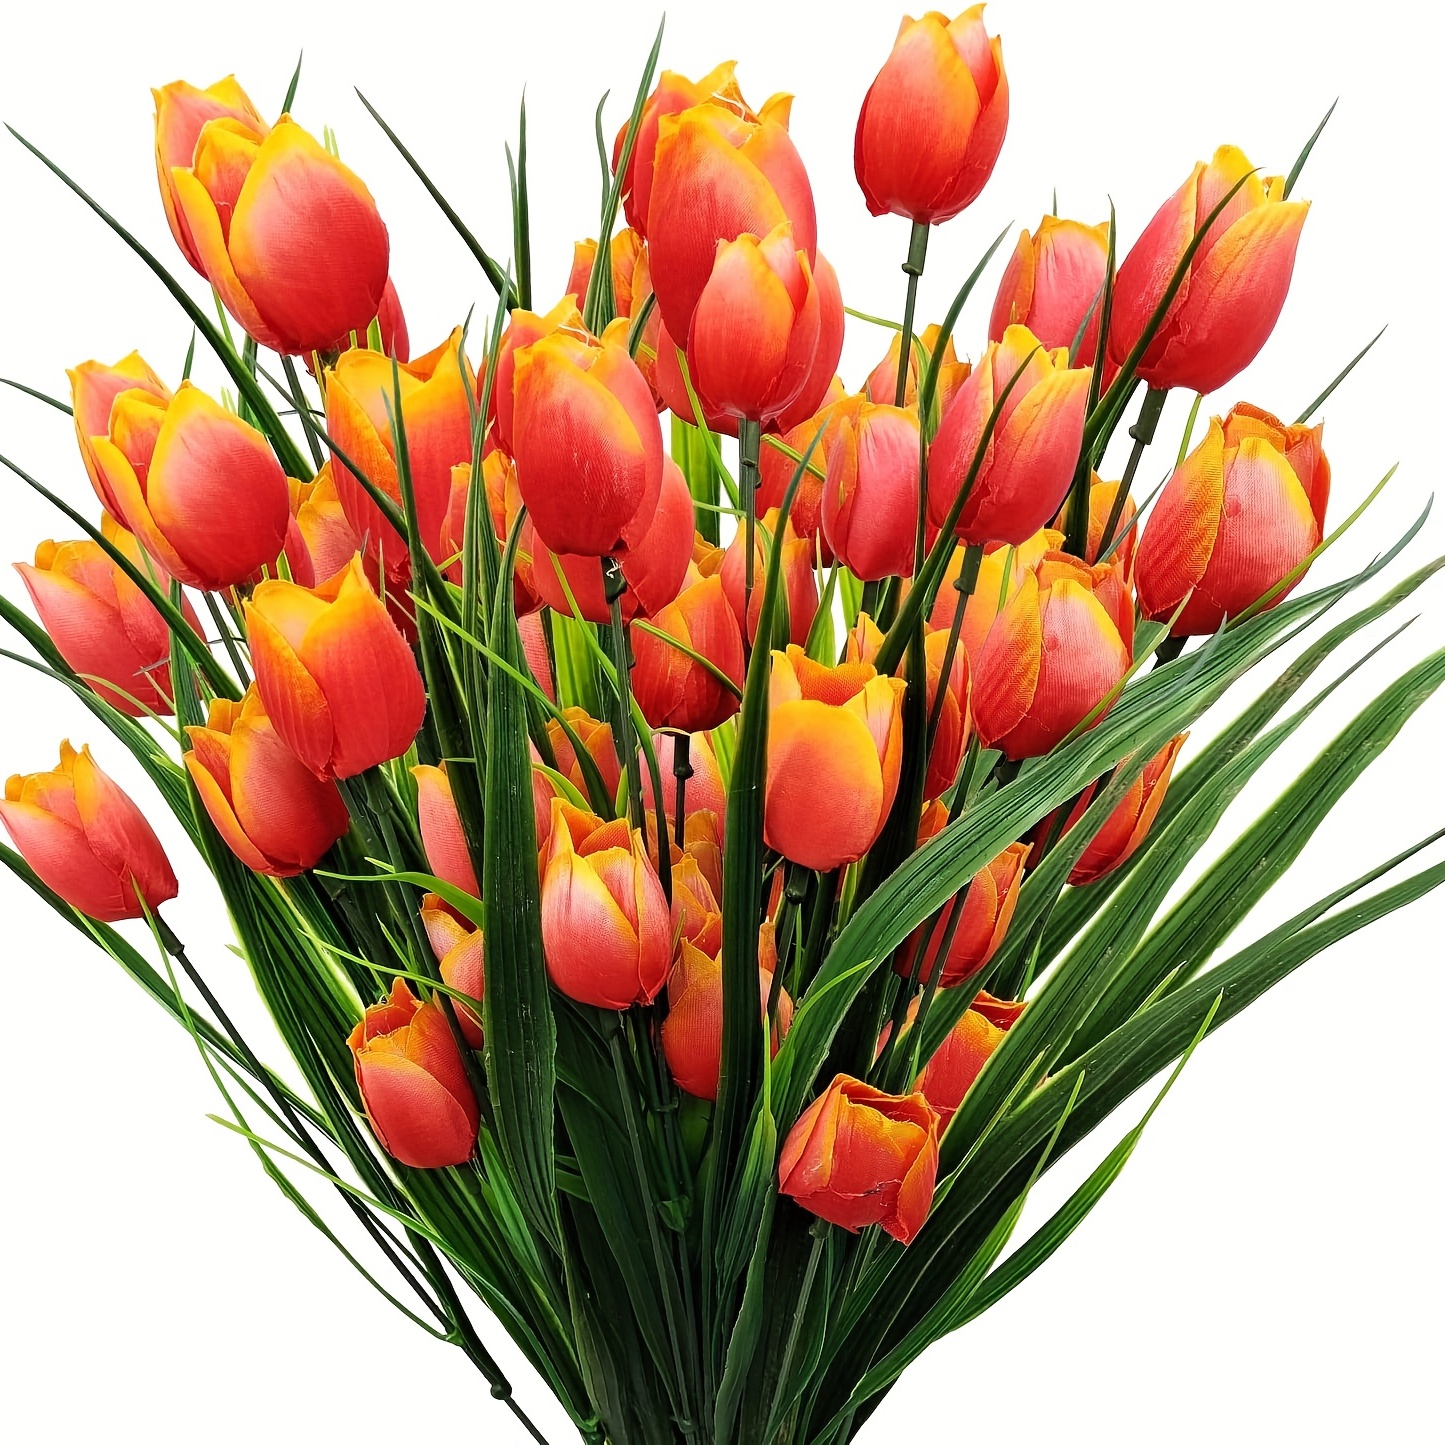 4 Bundles Of Uv-resistant Artificial Tulips: Perfect For Indoors ...